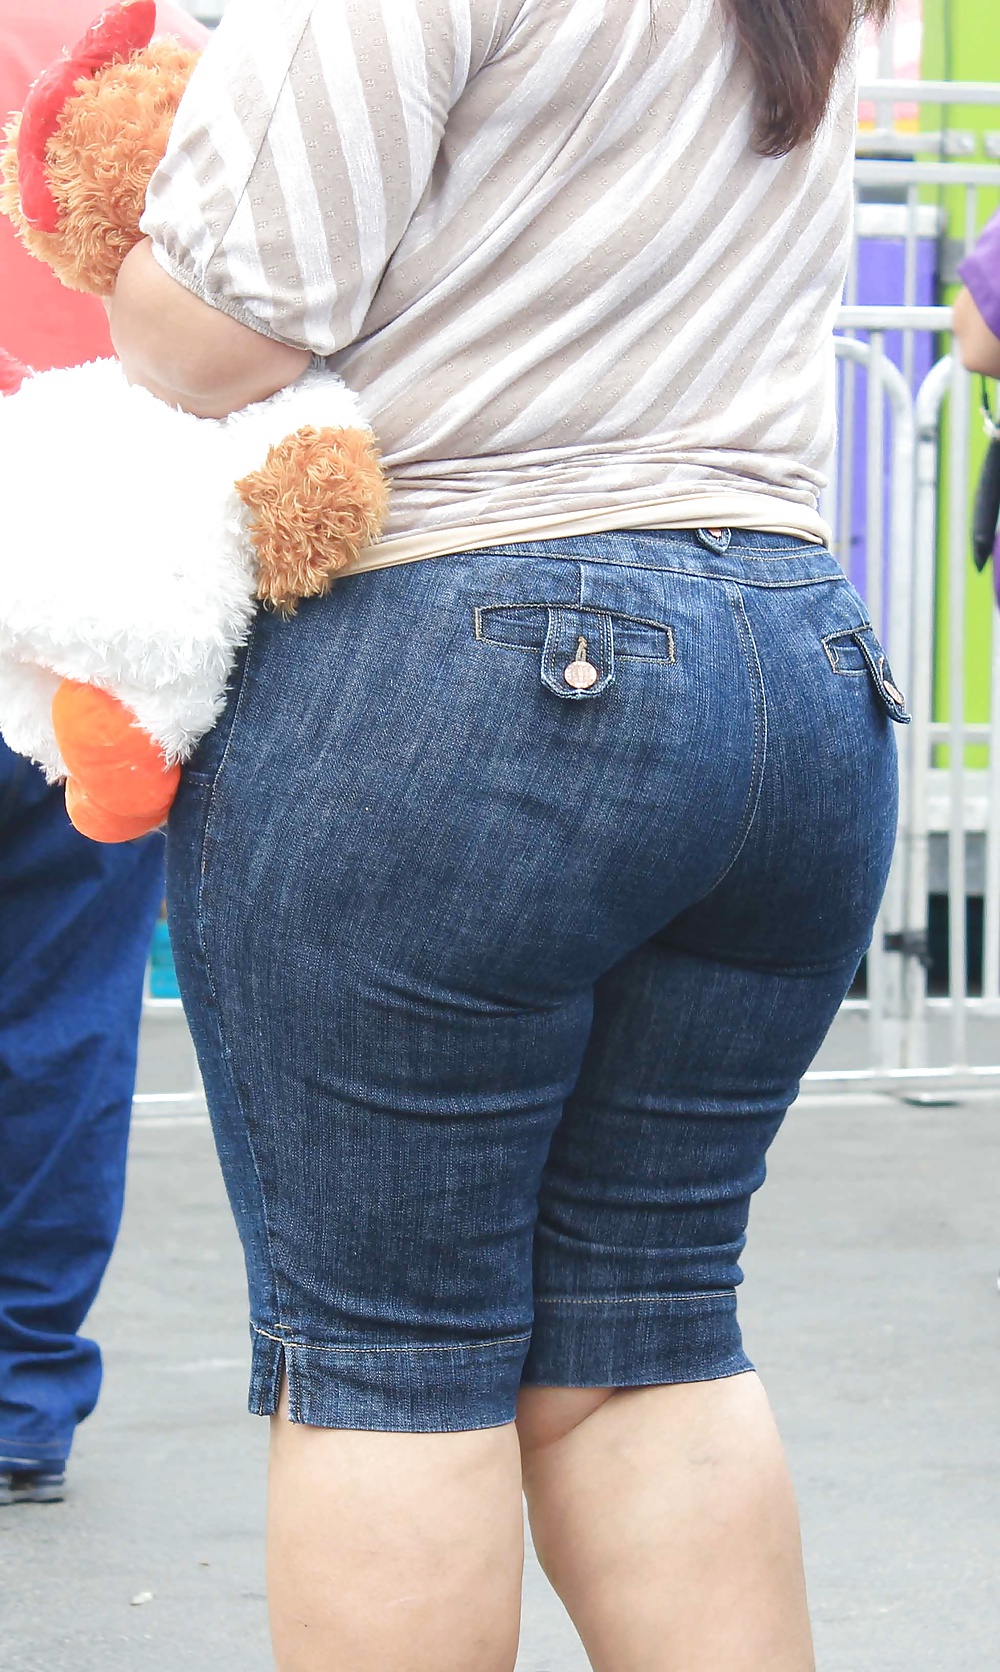 Candid Huge Latina Mom Ass in Jeans #31359614